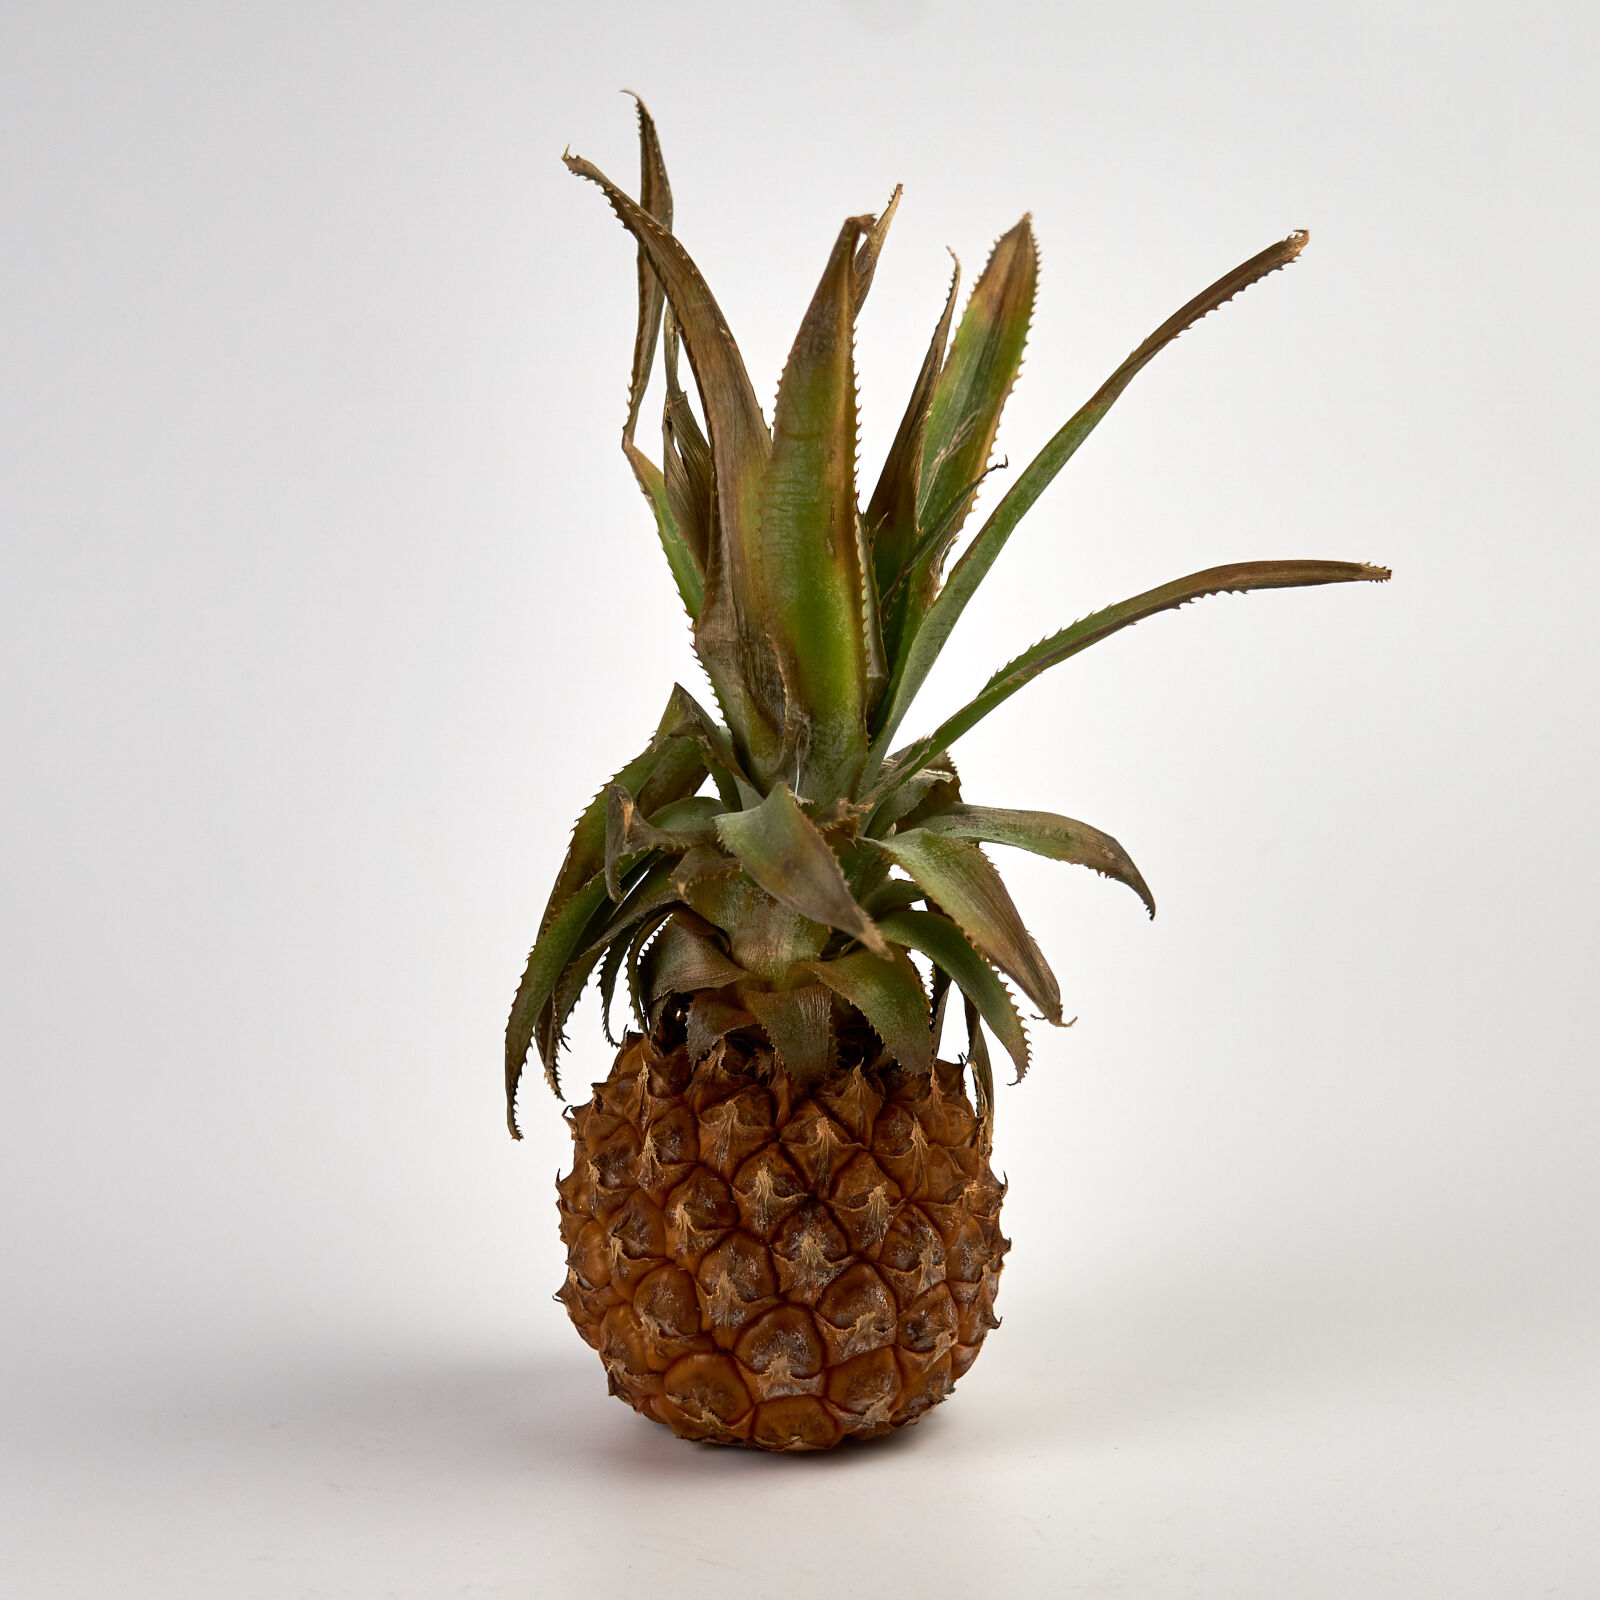 Sony a6000 sample photo. Agriculture, alimentation, ananas, bio photography